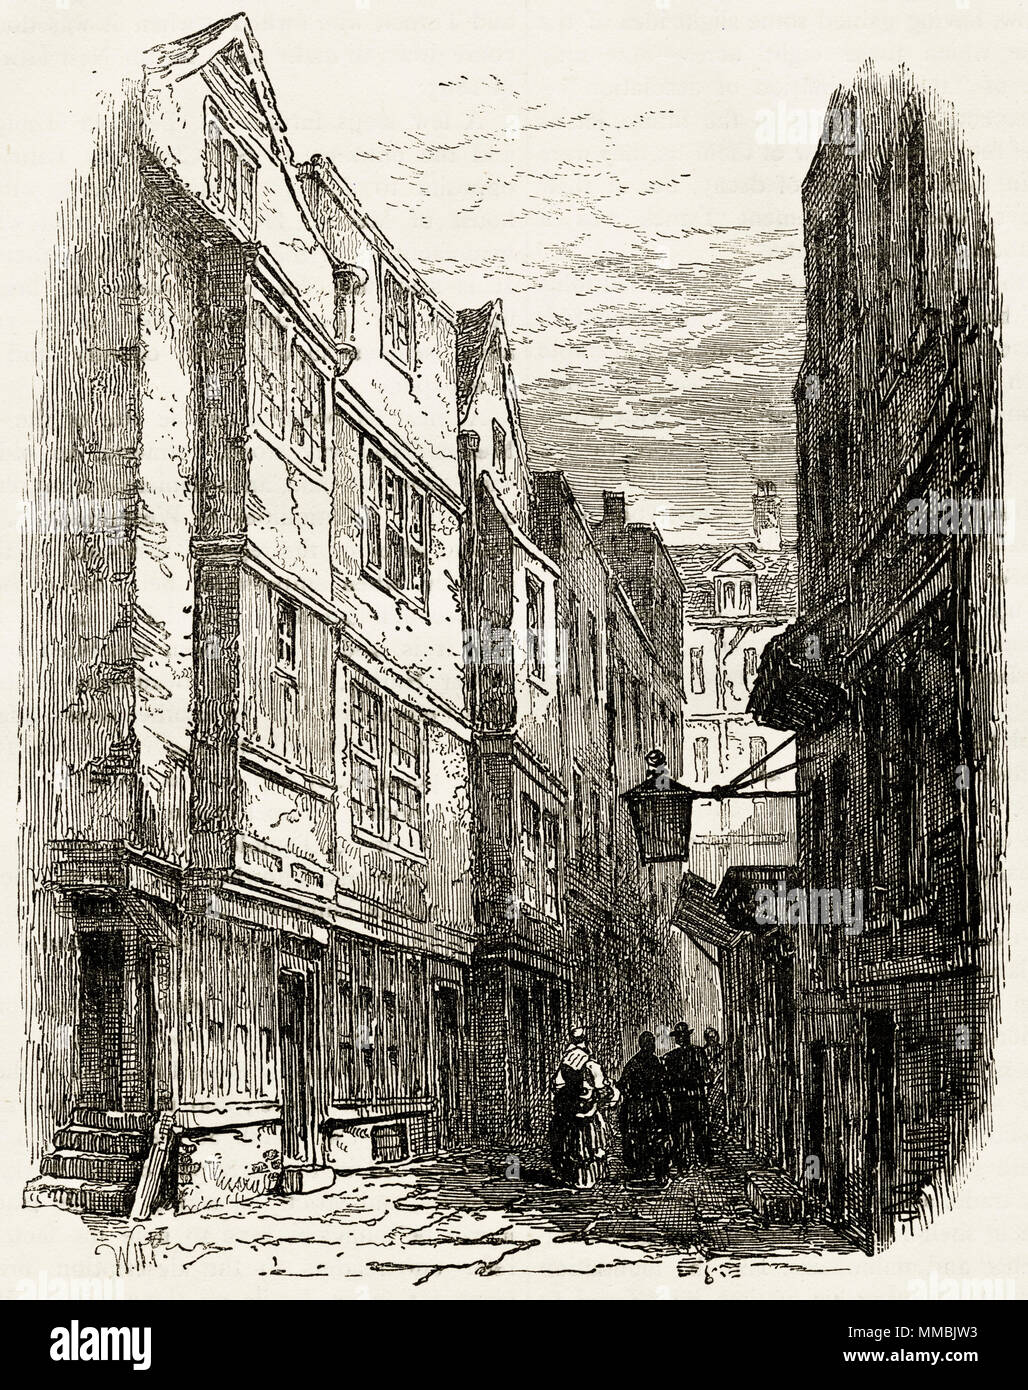 Serle's Place, London, England, UK demolished in 1866 to make way for the Royal Courts of Justice. 19th century Victorian engraving circa 1878 Stock Photo